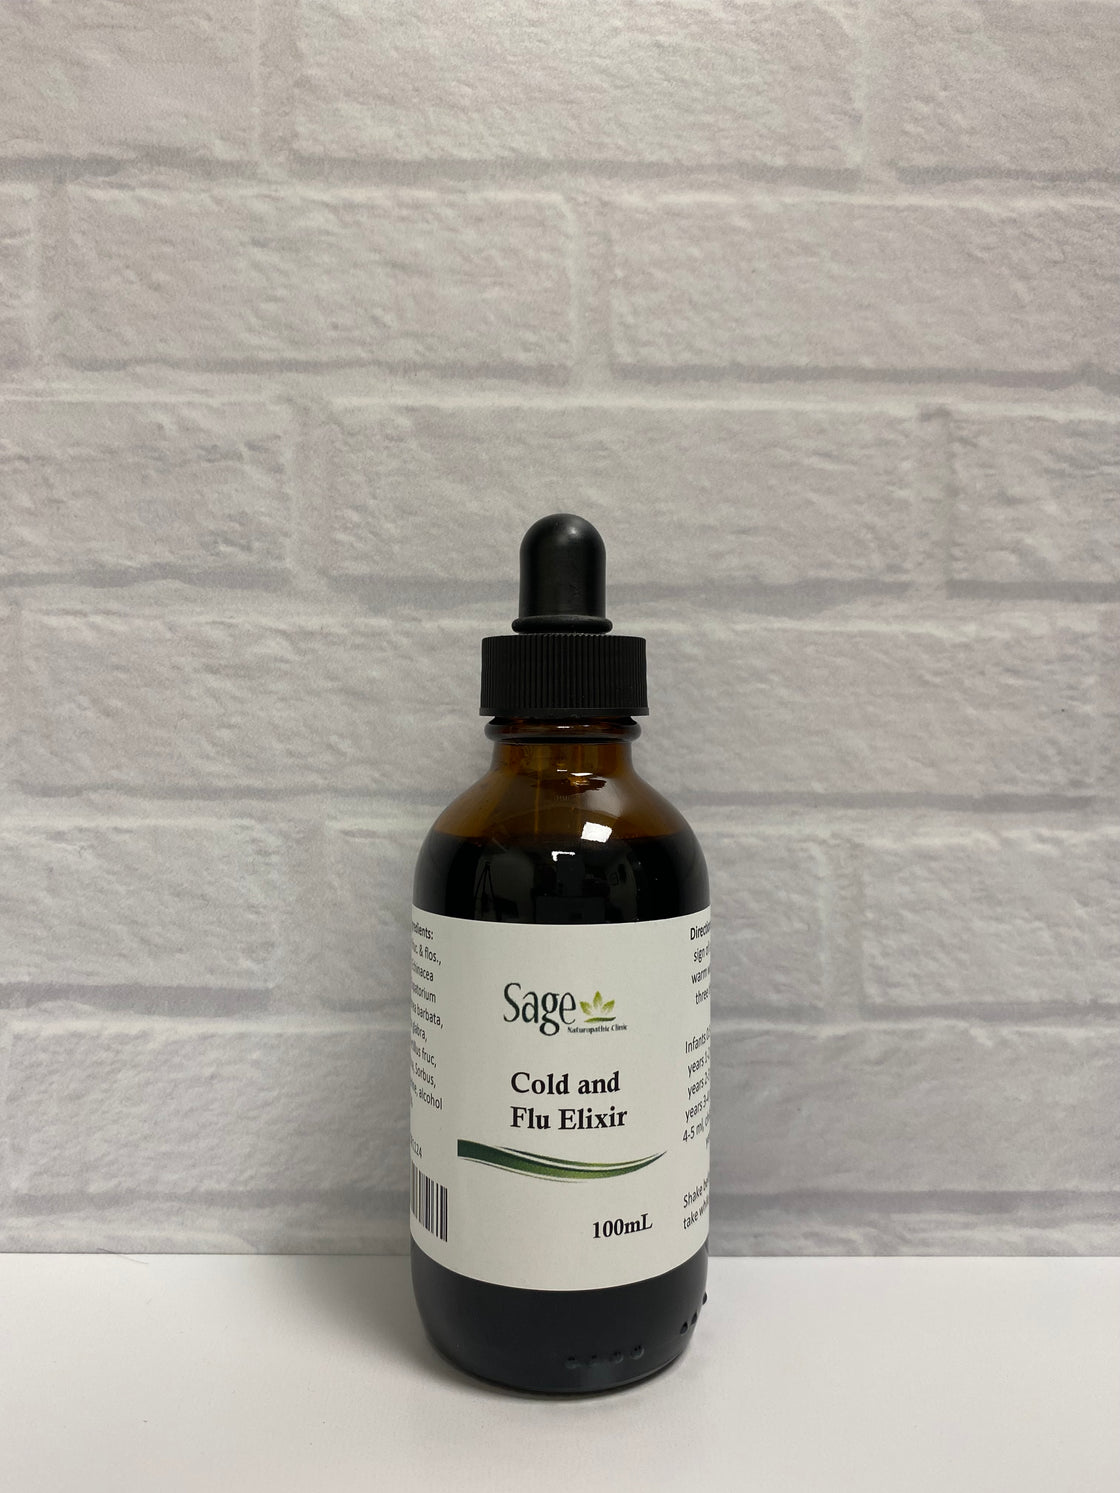 Sage's Cold and Flu Elixir 100ml